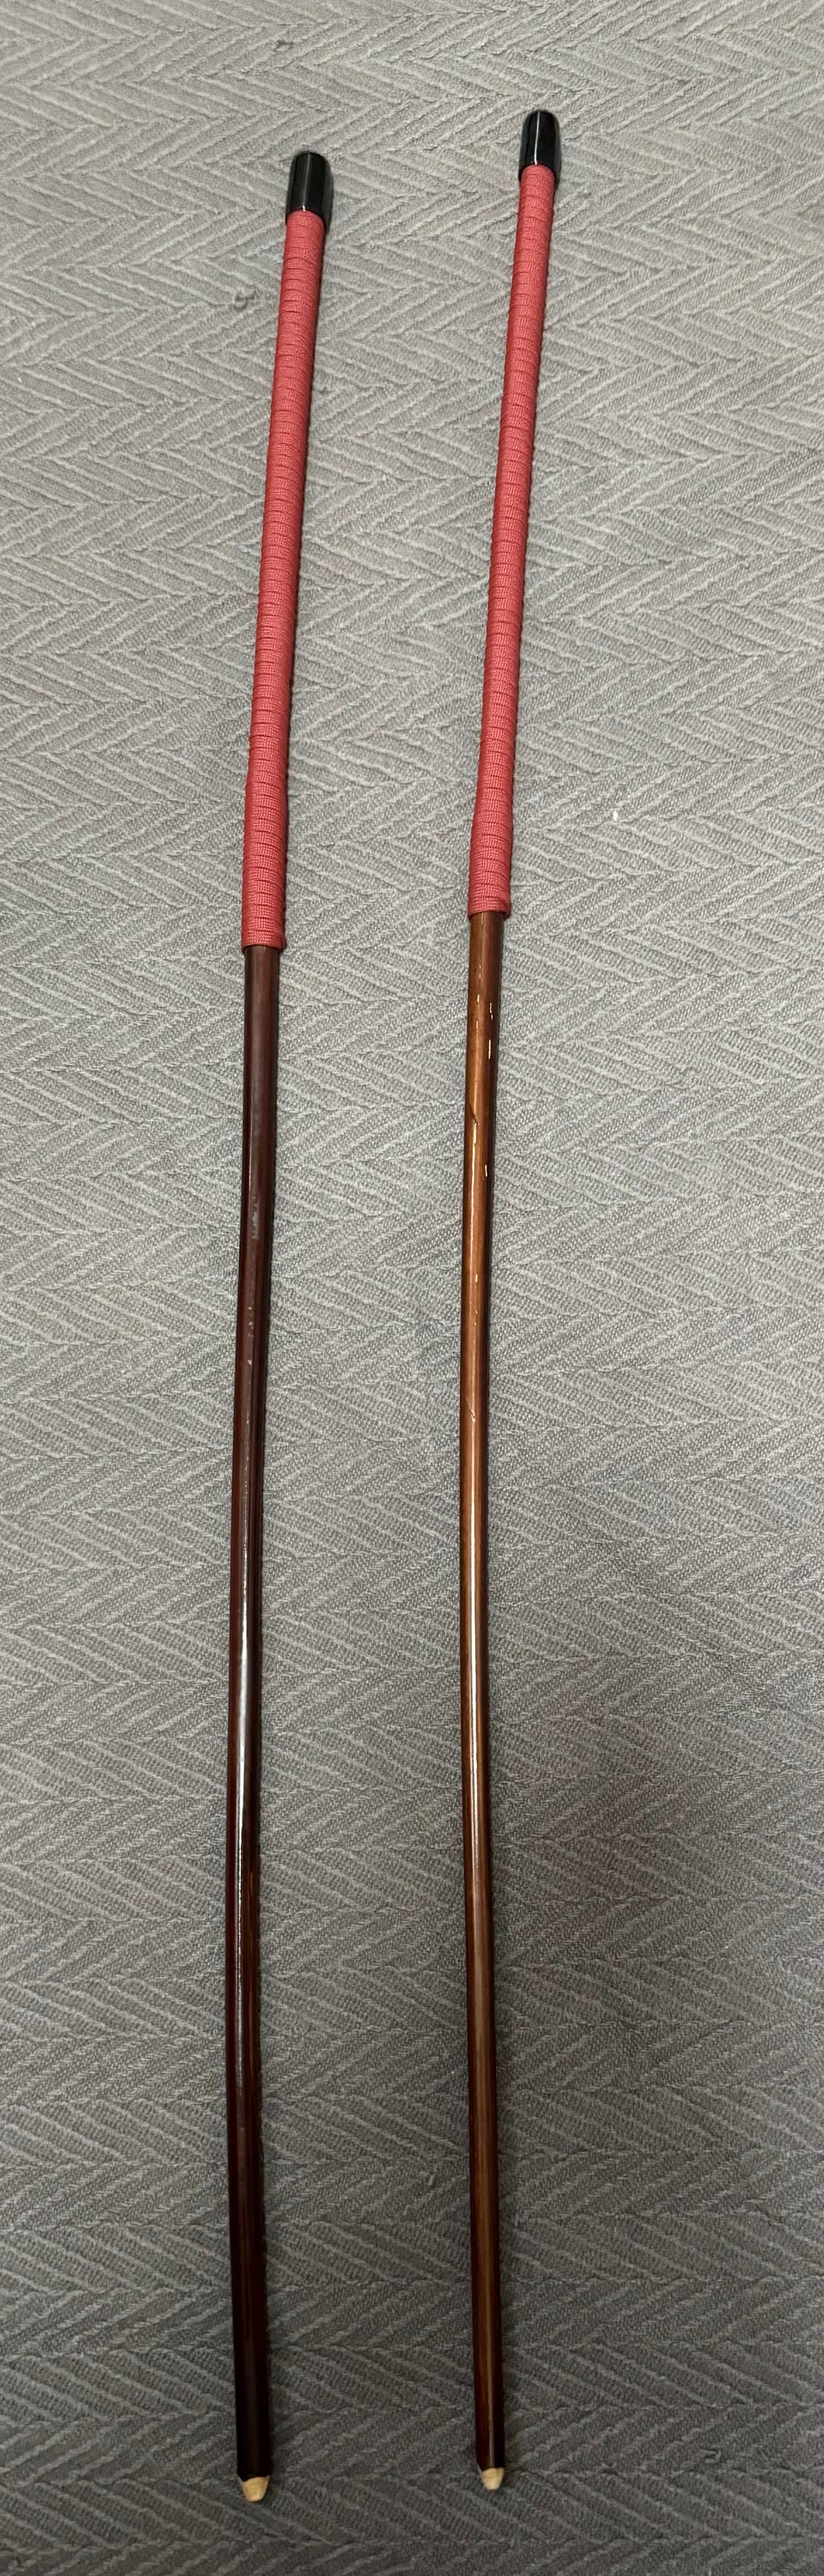 Set of 2 Knotless Smoked Dragon Canes / Ultimate No Knot Smoked Dragon Canes  - 82 to 84 cms Length - BRICK RED Paracord Handles - Englishvice Canes